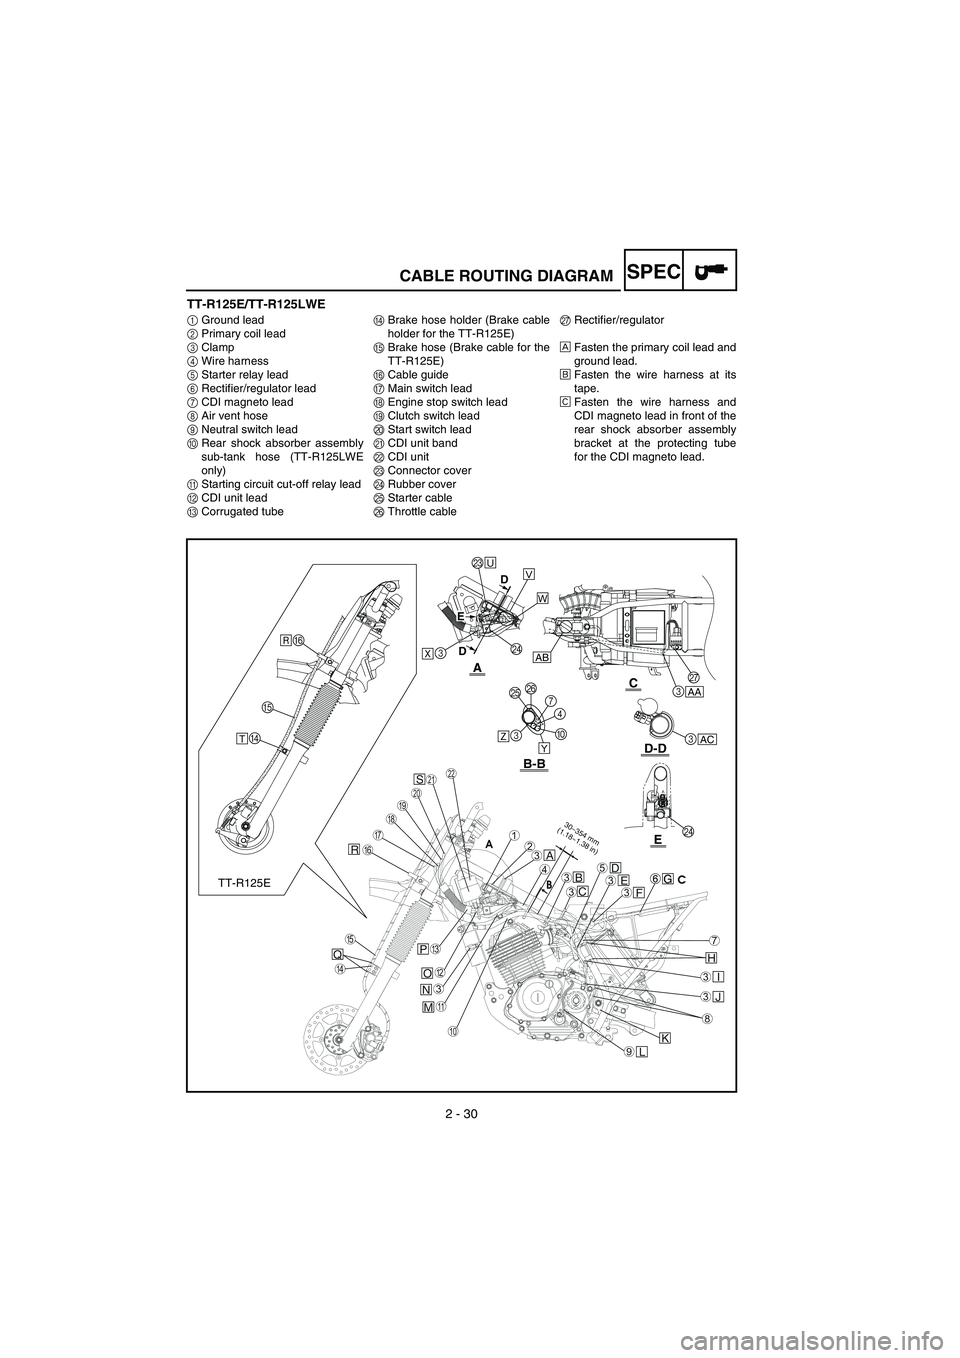 YAMAHA TTR125 2007  Notices Demploi (in French) 6 - B - V
2 - 30
SPECCABLE ROUTING DIAGRAM
TT-R125E/TT-R125LWE
1Ground lead
2 Primary coil lead
3 Clamp
4 Wire harness
5 Starter relay lead
6 Rectifier/regulator lead
7 CDI magneto lead
8 Air vent hos